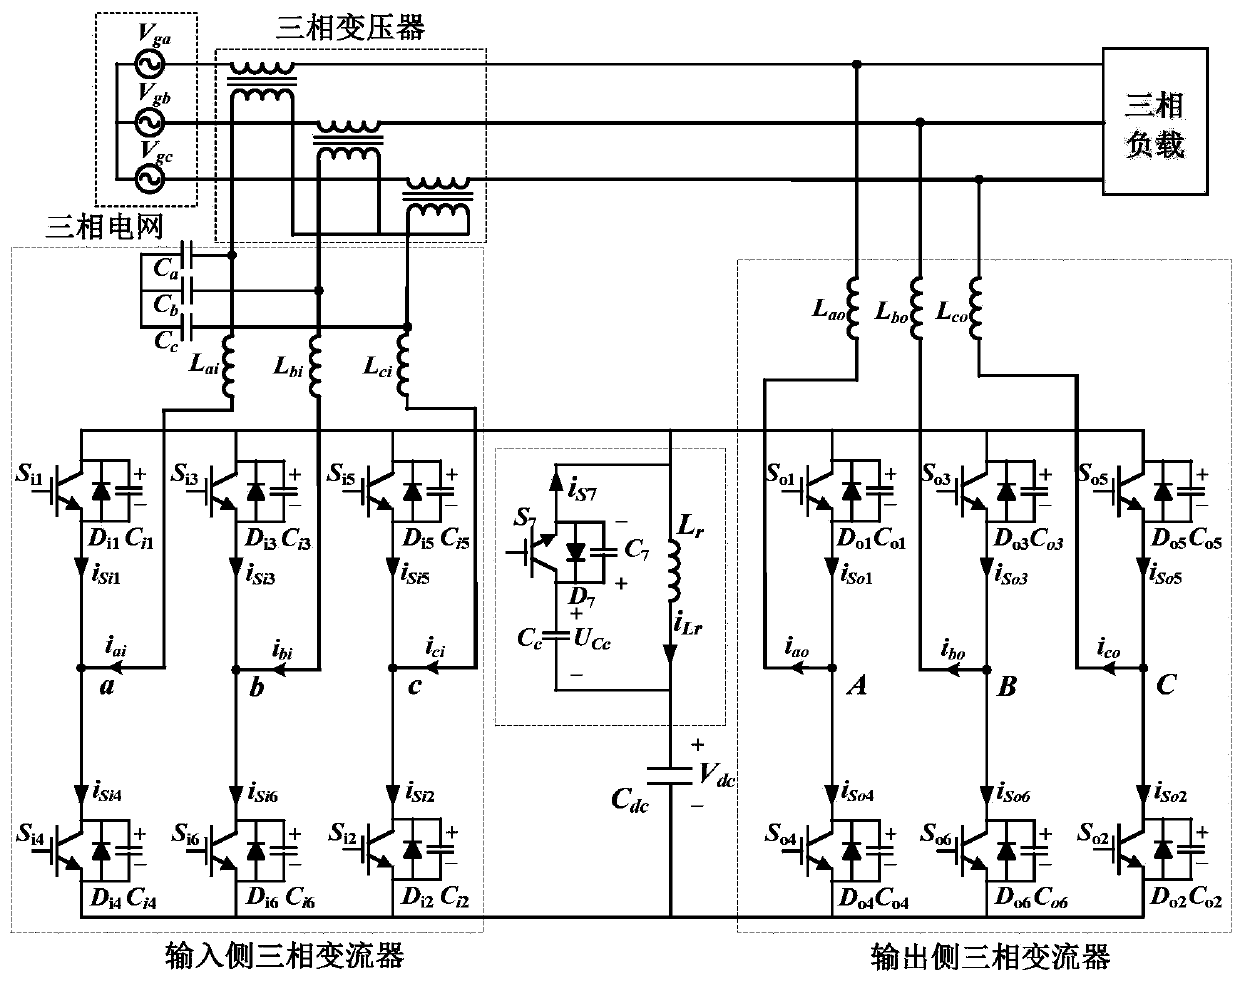 Unified power quality regulator based on soft switching circuit